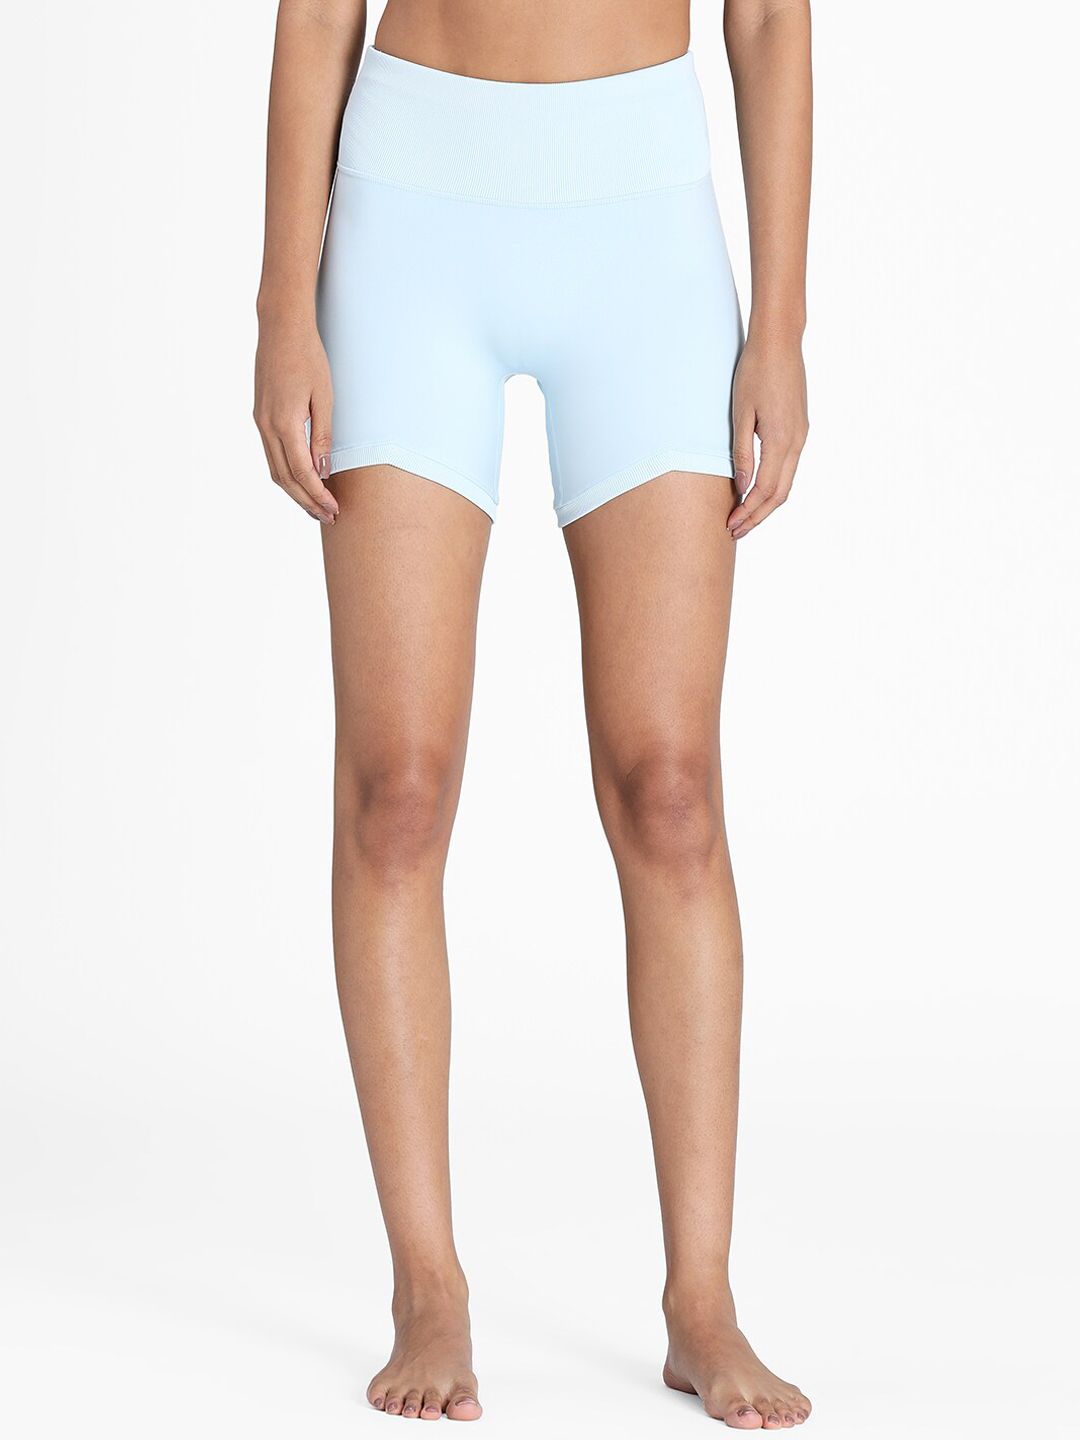 Puma Women Turquoise Blue Exhale Low-Rise Yoga Shorts Price in India